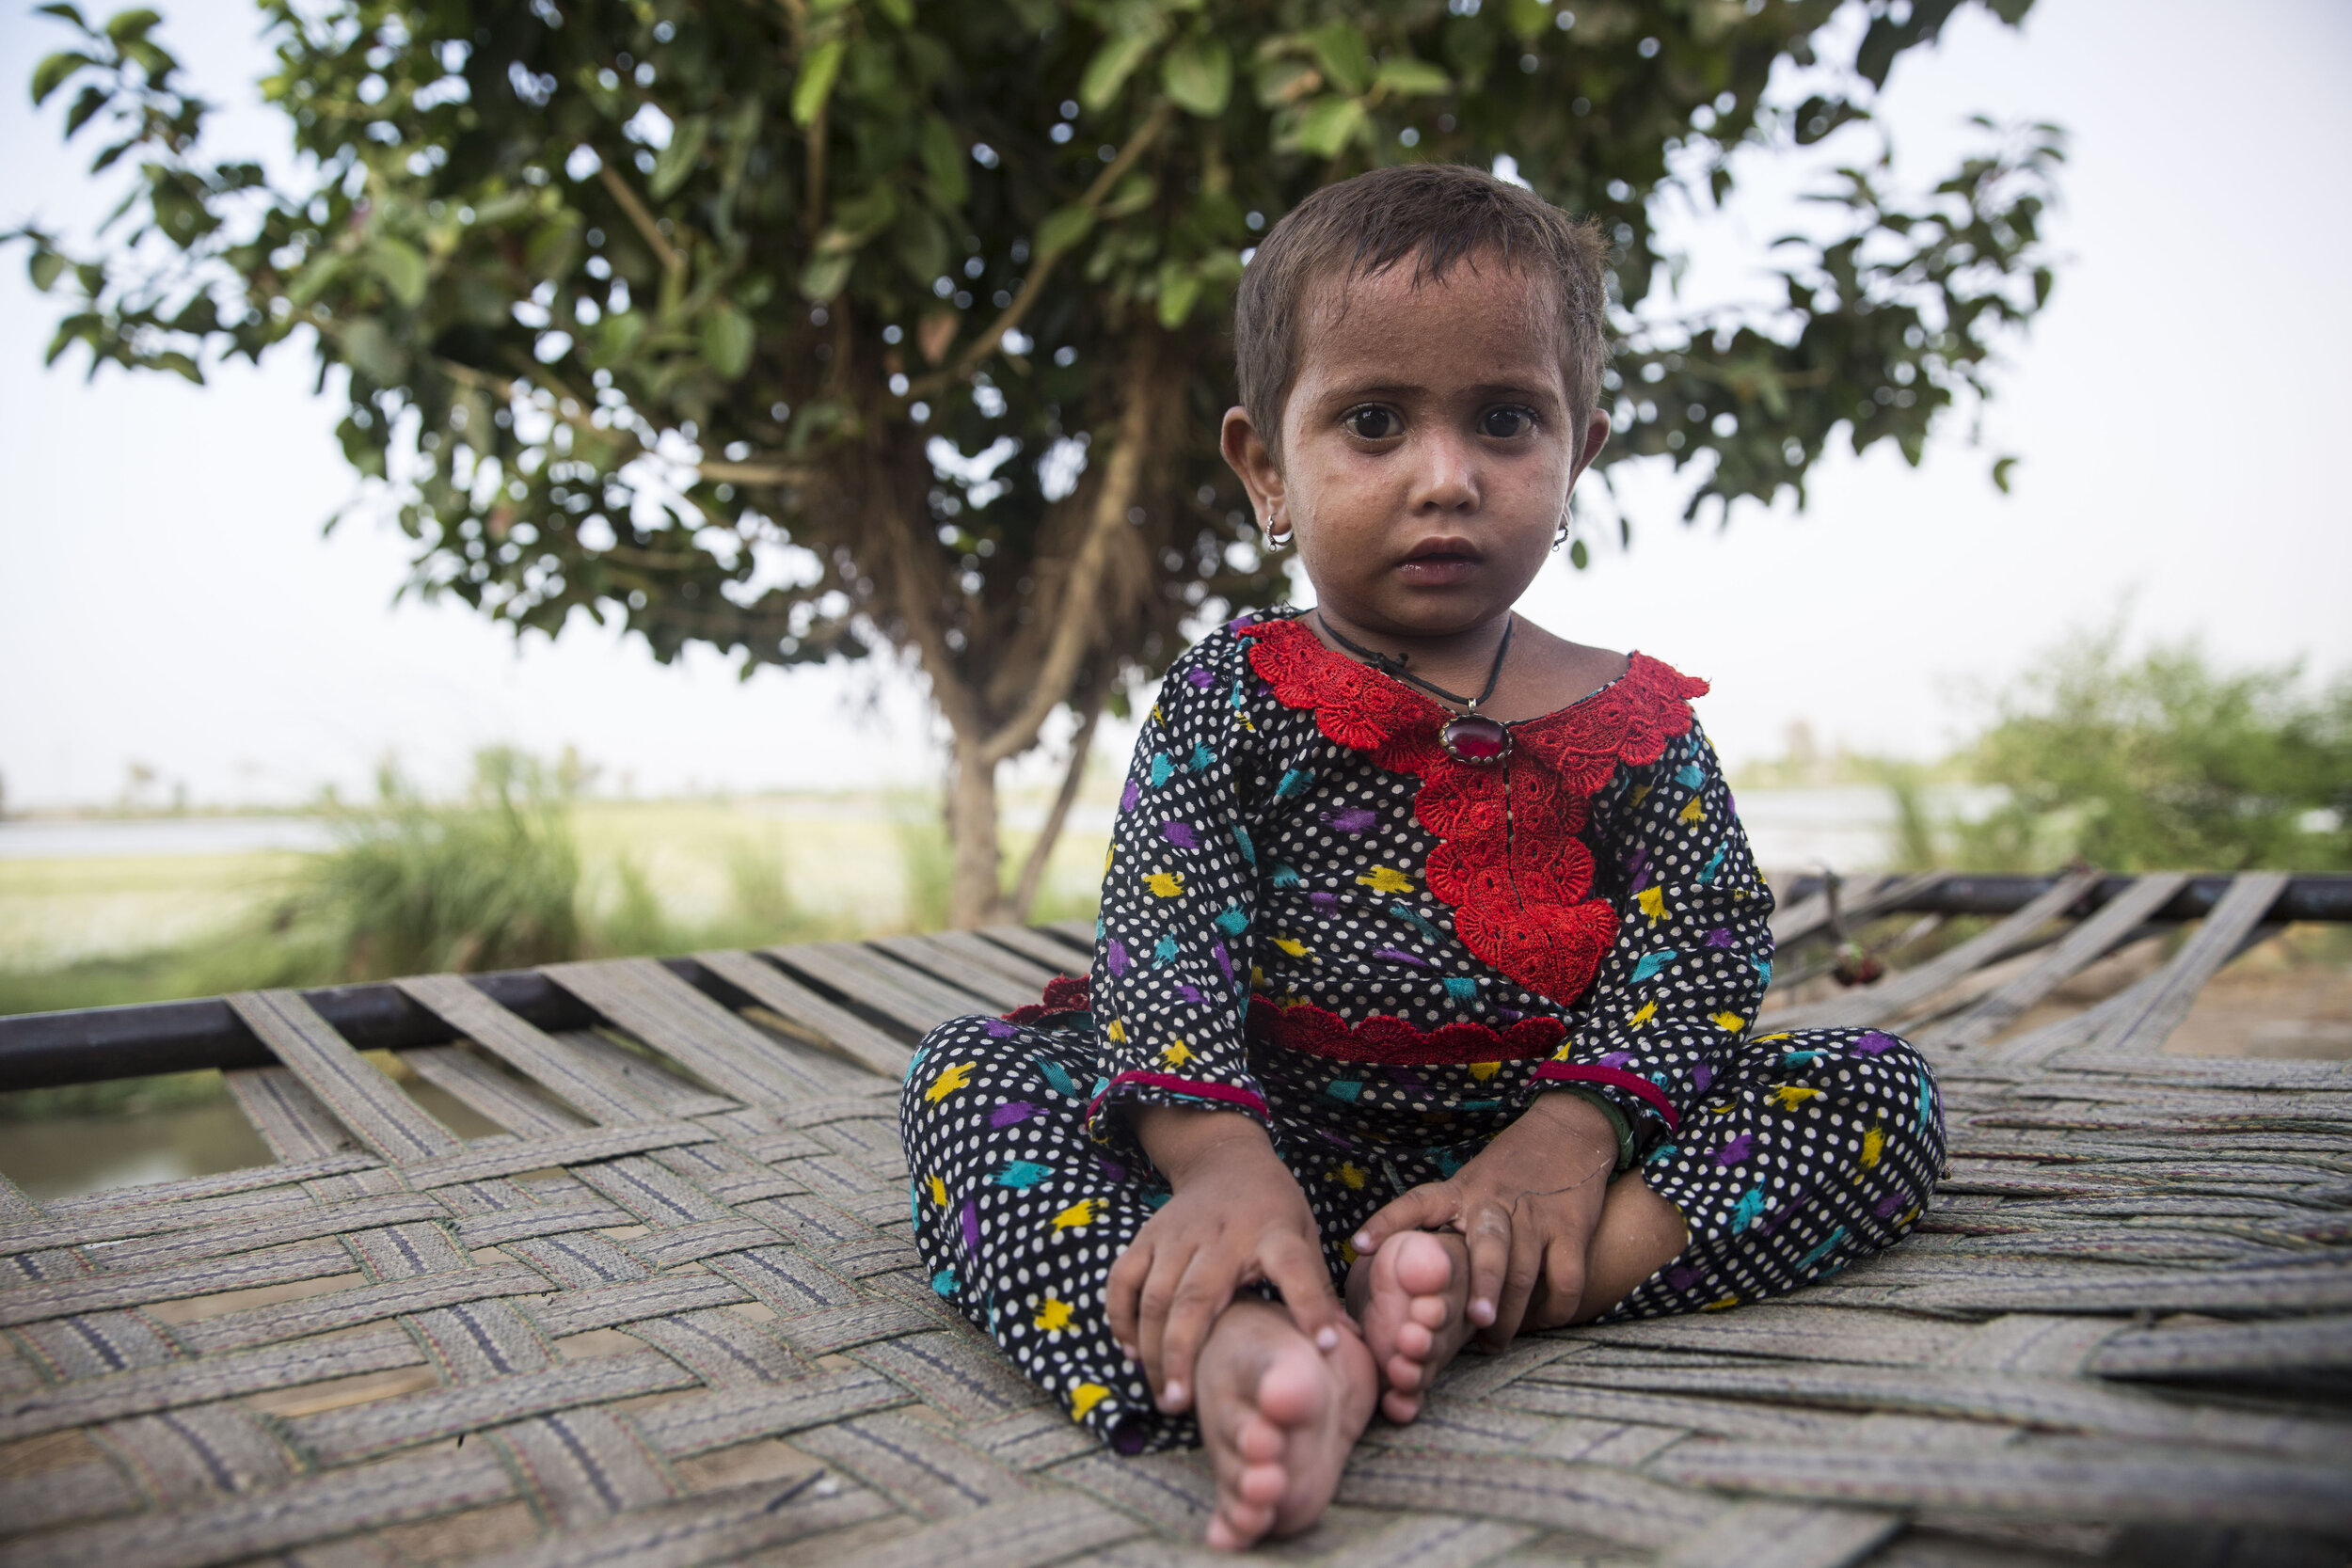  3-year-old Jeehjan who has been diagnosed with HIV in Subhani Shar village, around 8 km from Ratodero on July 25, 2019 in Sind, Pakistan.  